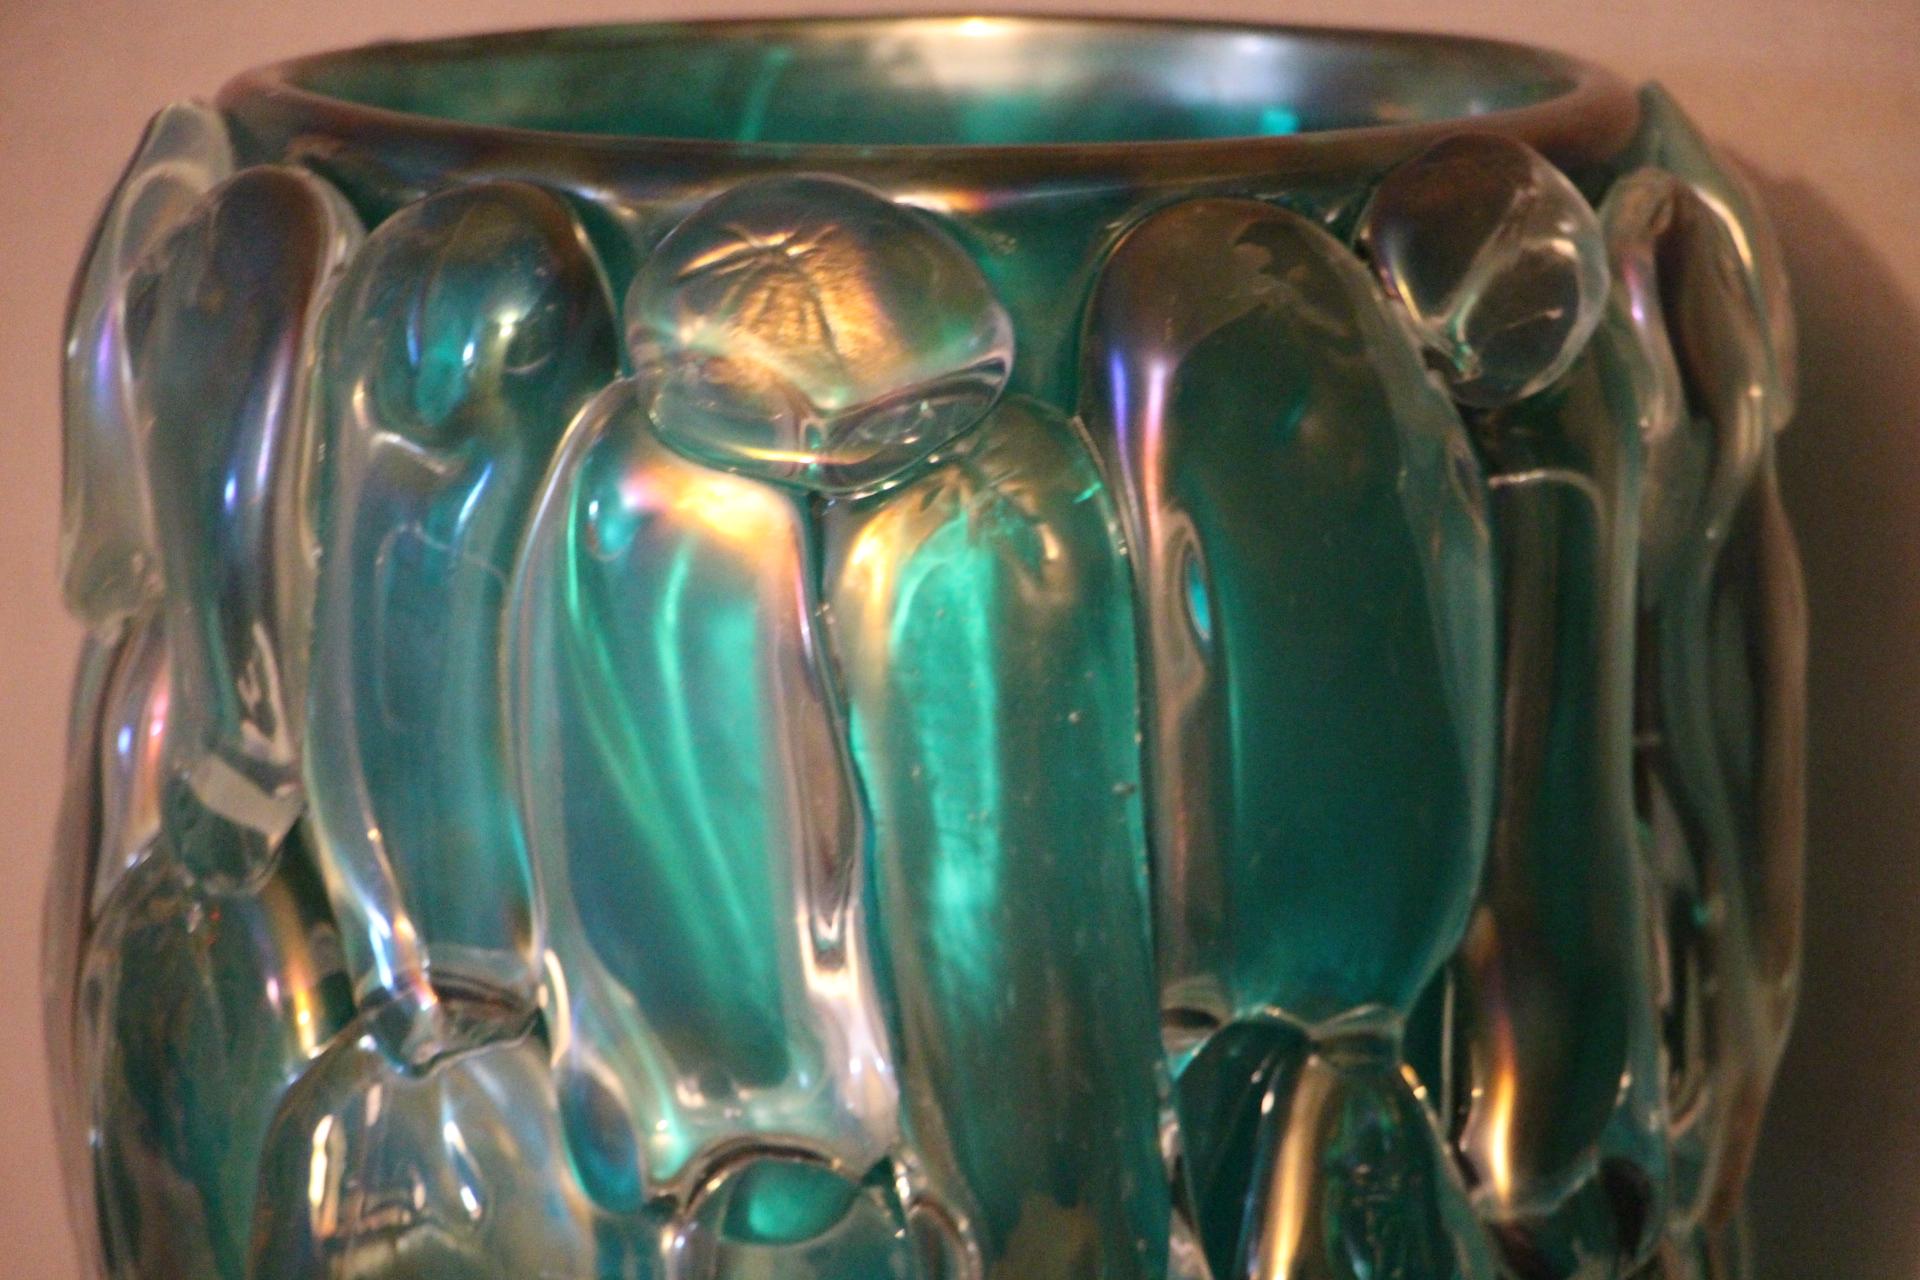 Pair of Large Emerald Green Color and Iridescent Murano Glass Vases by Cenedese 1